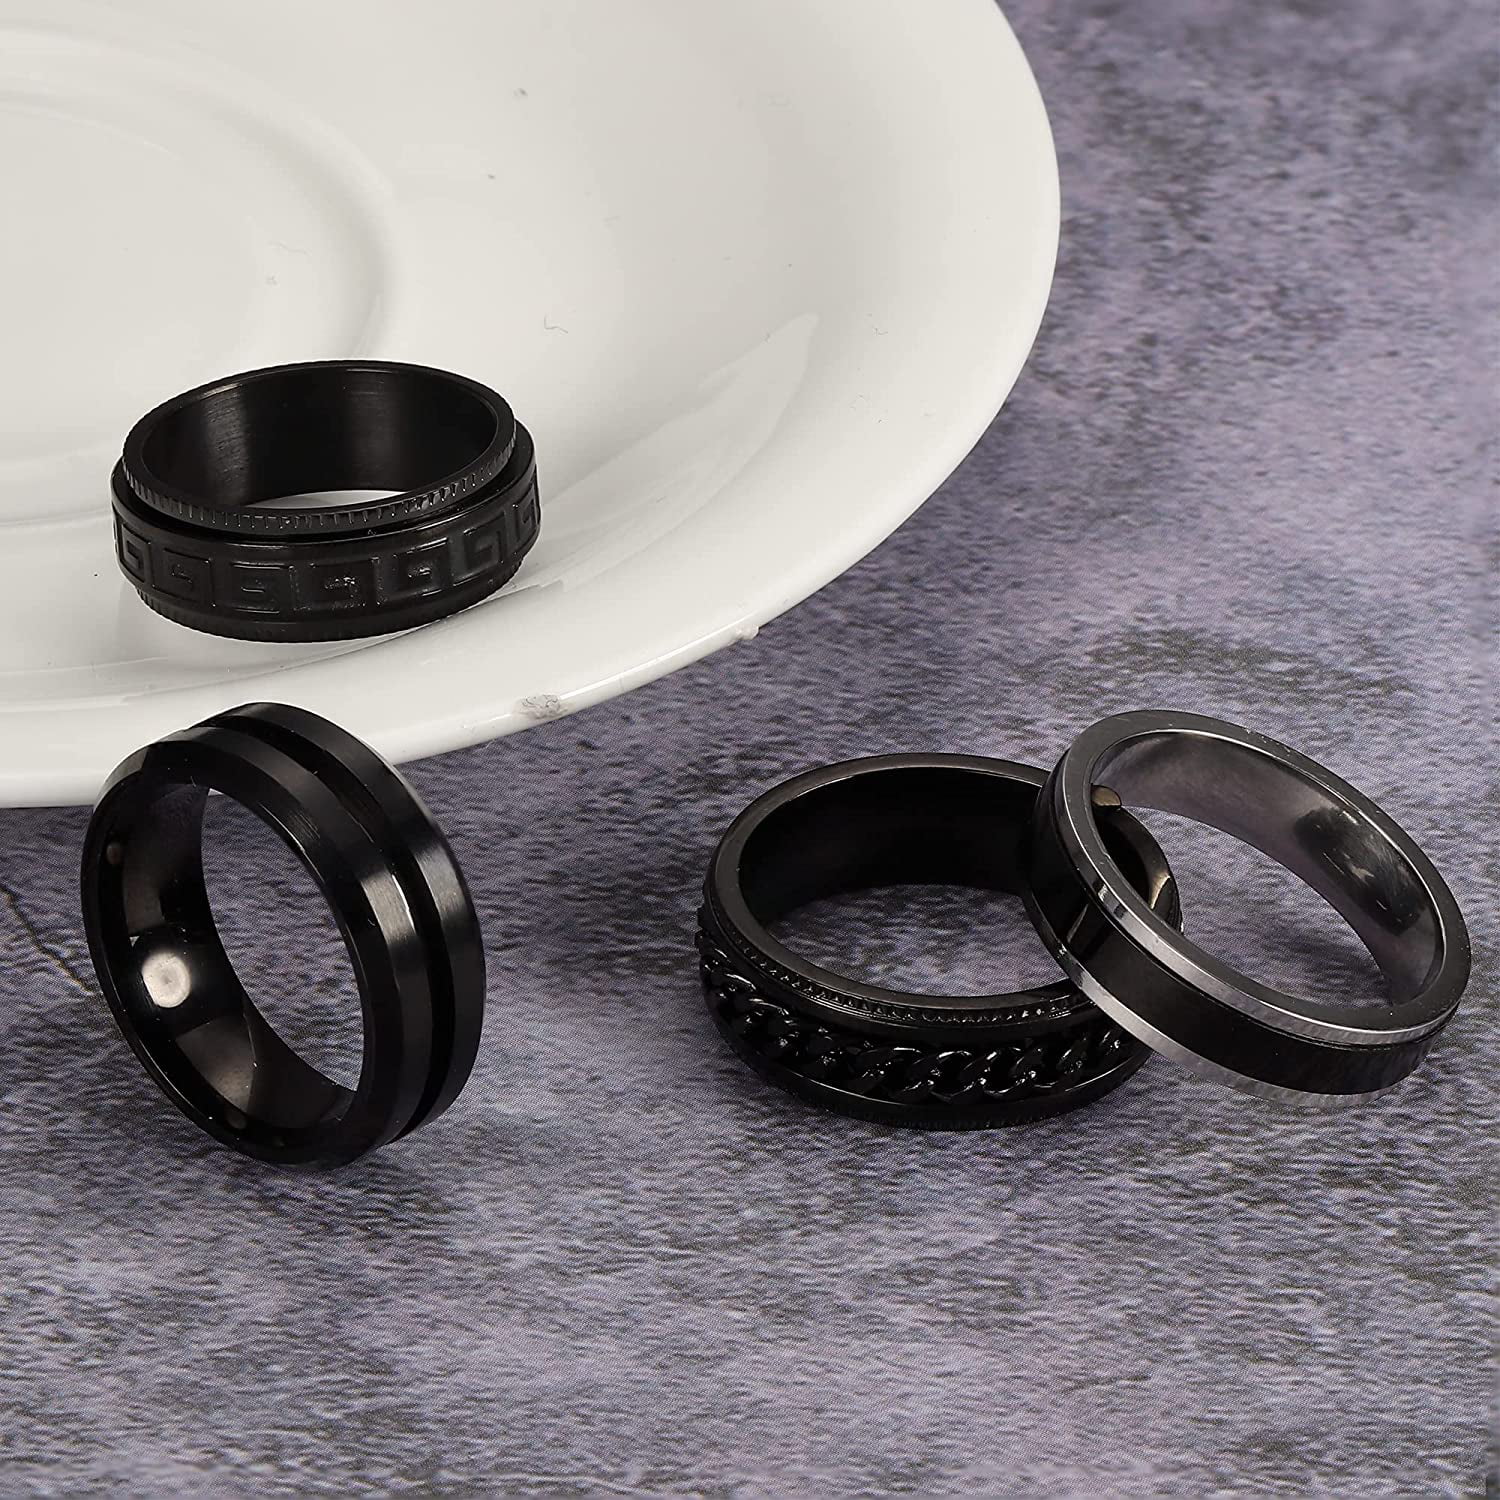 THUNARAZ 6 Pieces Black Spinner Rings for Men Women Cool Chain Inlaid Stainless Steel Fidget Rings for Anxiety 8mm Wide Stress Relieving Fashion Wedding Promise Band Rings Size 7-13 